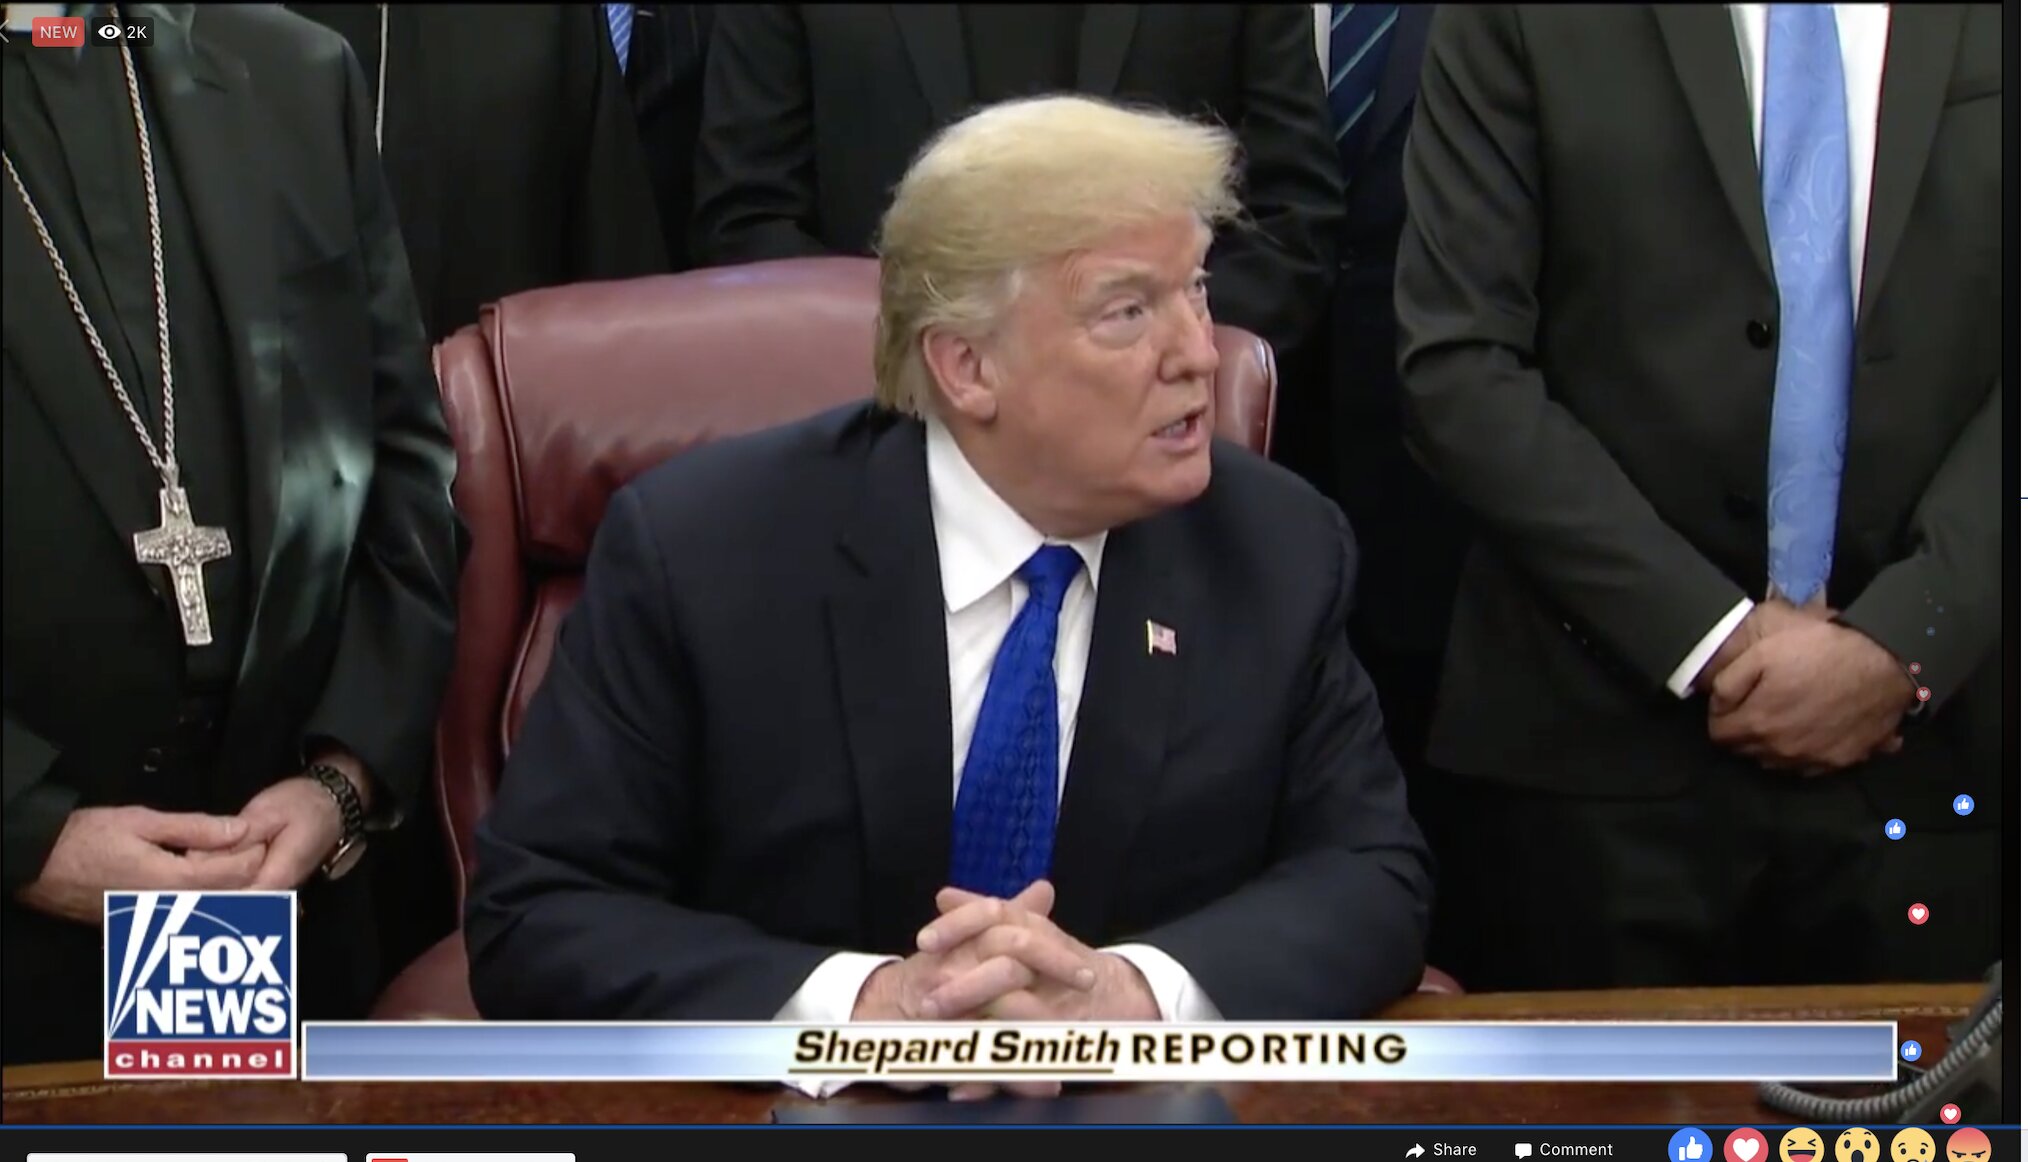 Trump: “If we don’t have boarder security, we’ll shut down the government.” Speaks After Heated Meeting With Pelosi, Schumer